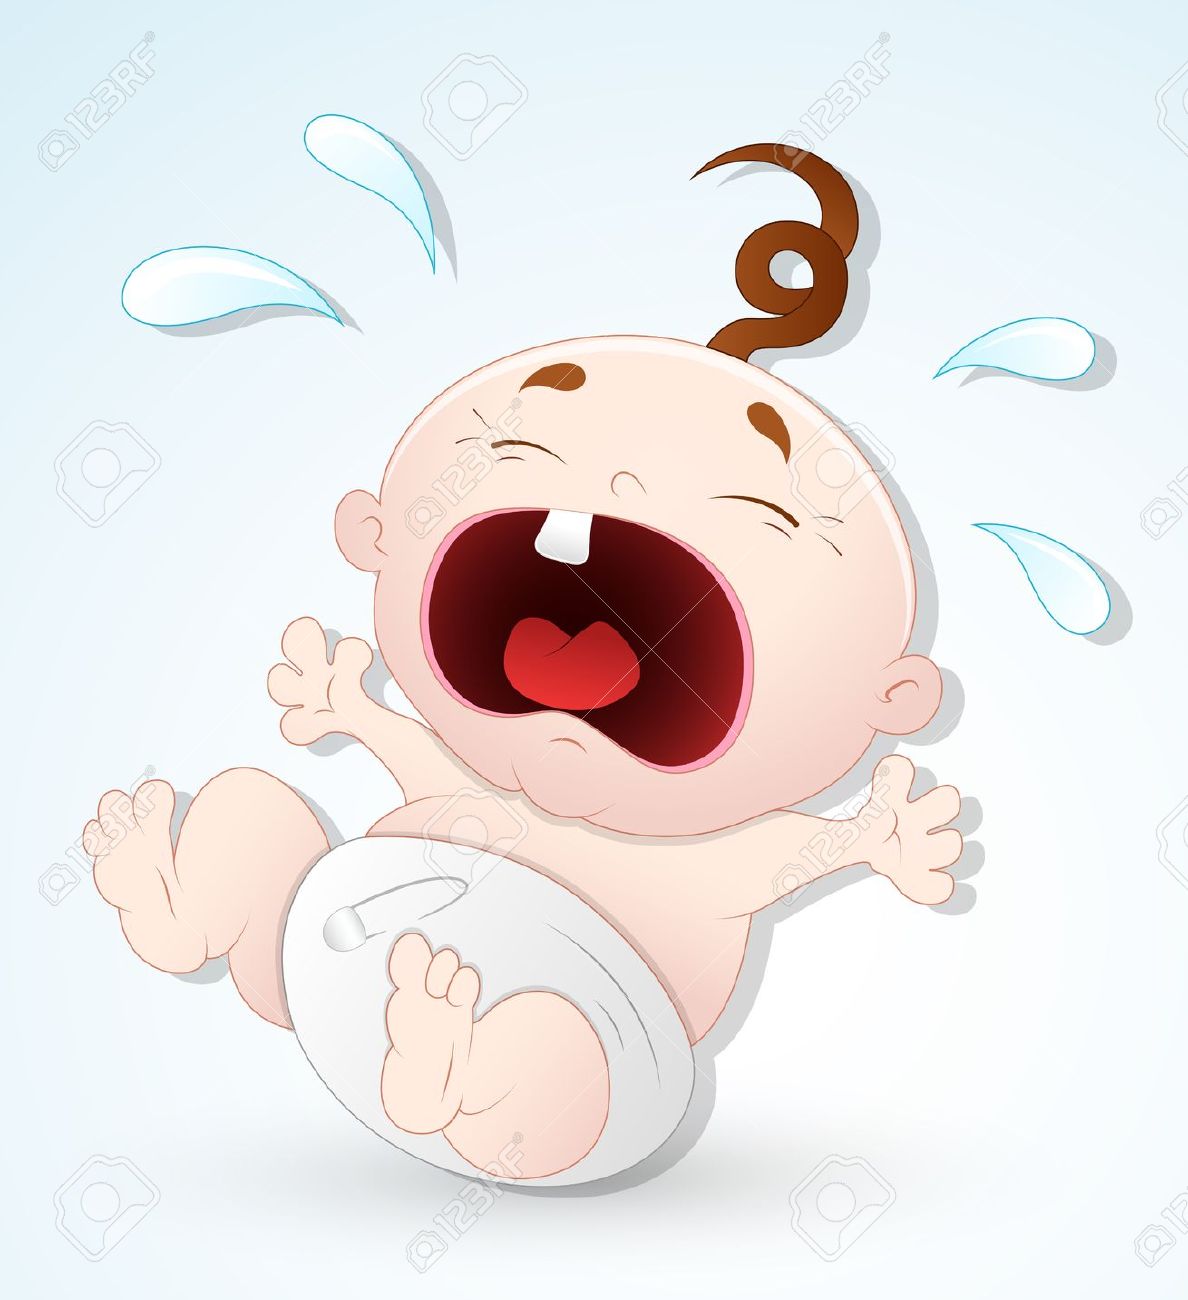 Baby Crying Stock Vector - 13206978